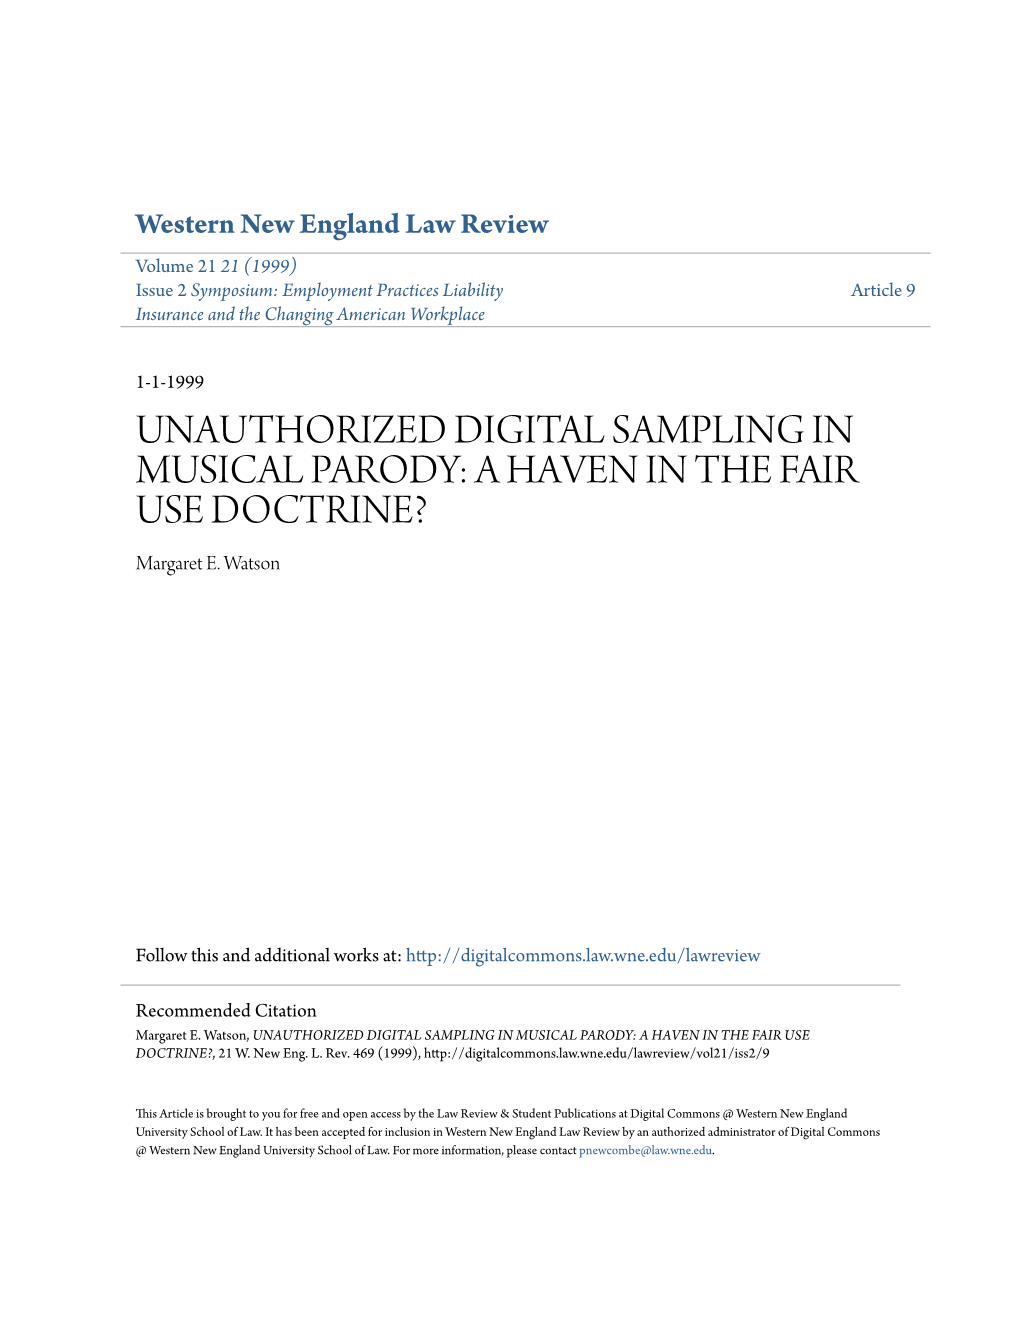 UNAUTHORIZED DIGITAL SAMPLING in MUSICAL PARODY: a HAVEN in the FAIR USE DOCTRINE? Margaret E